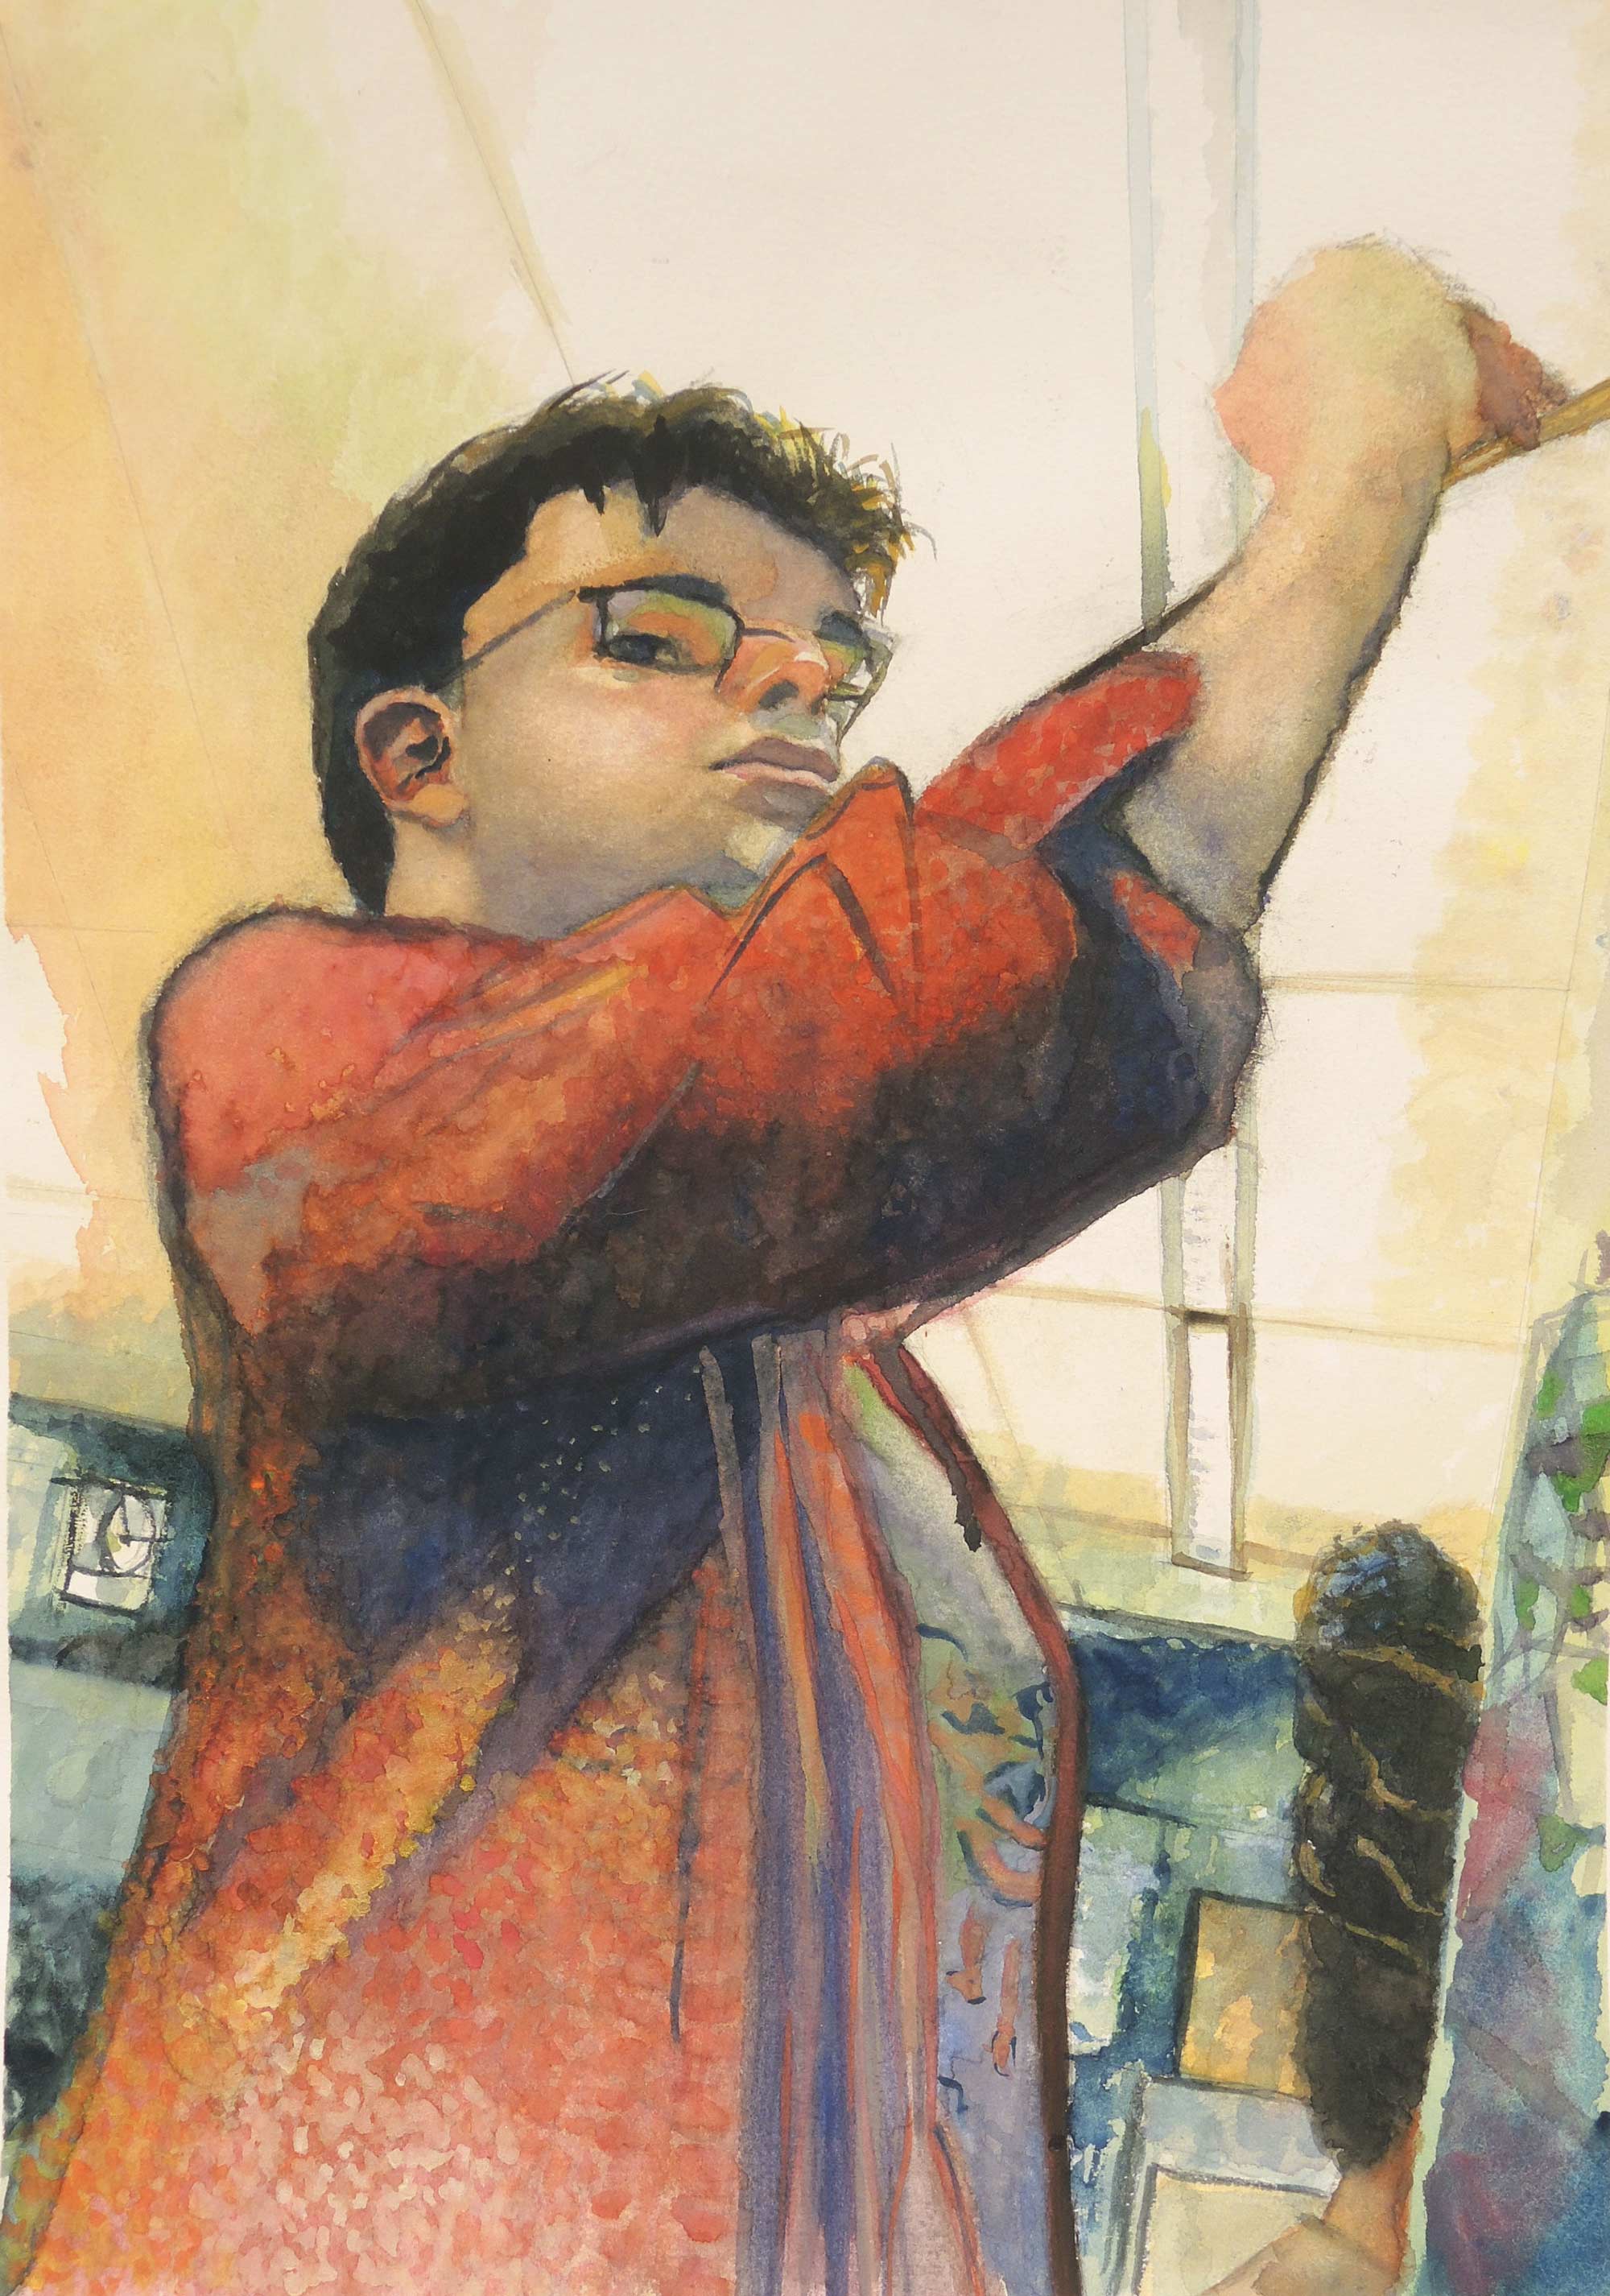 A painting by Robert Gomez of a young person painting